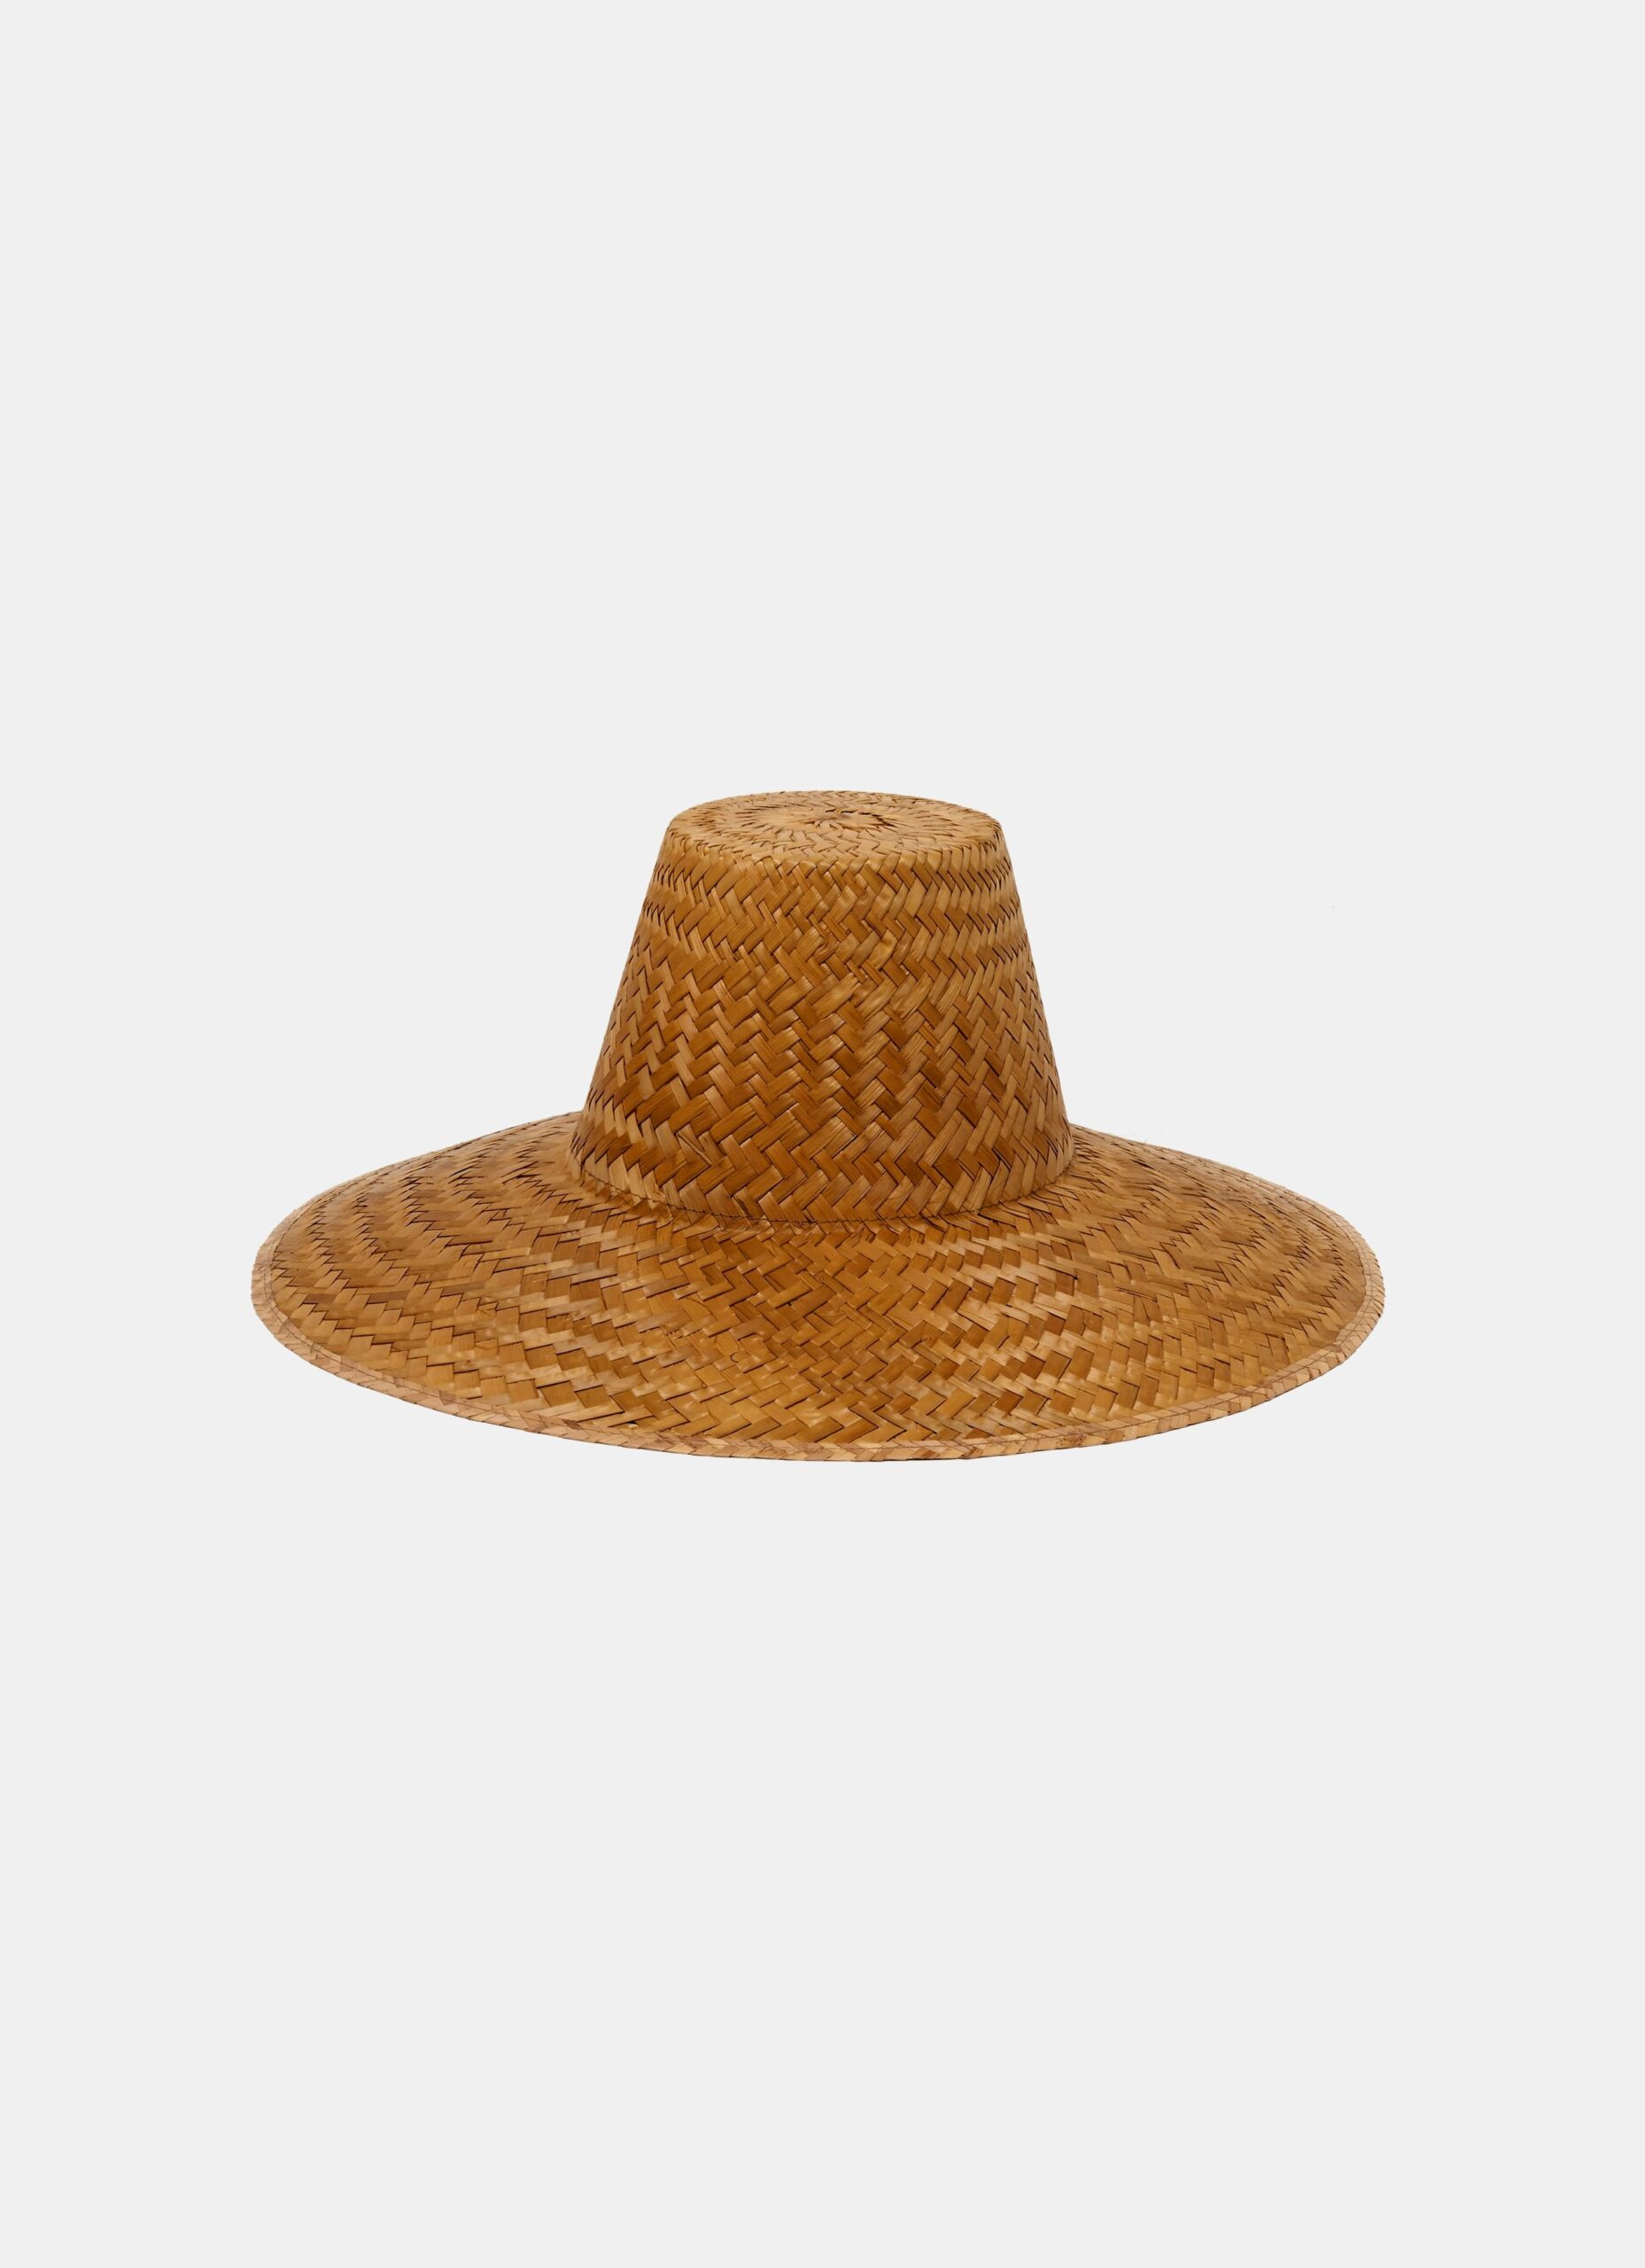 Communitie Marfa - Pinto Canyon Hat - Cooked Palm Straw